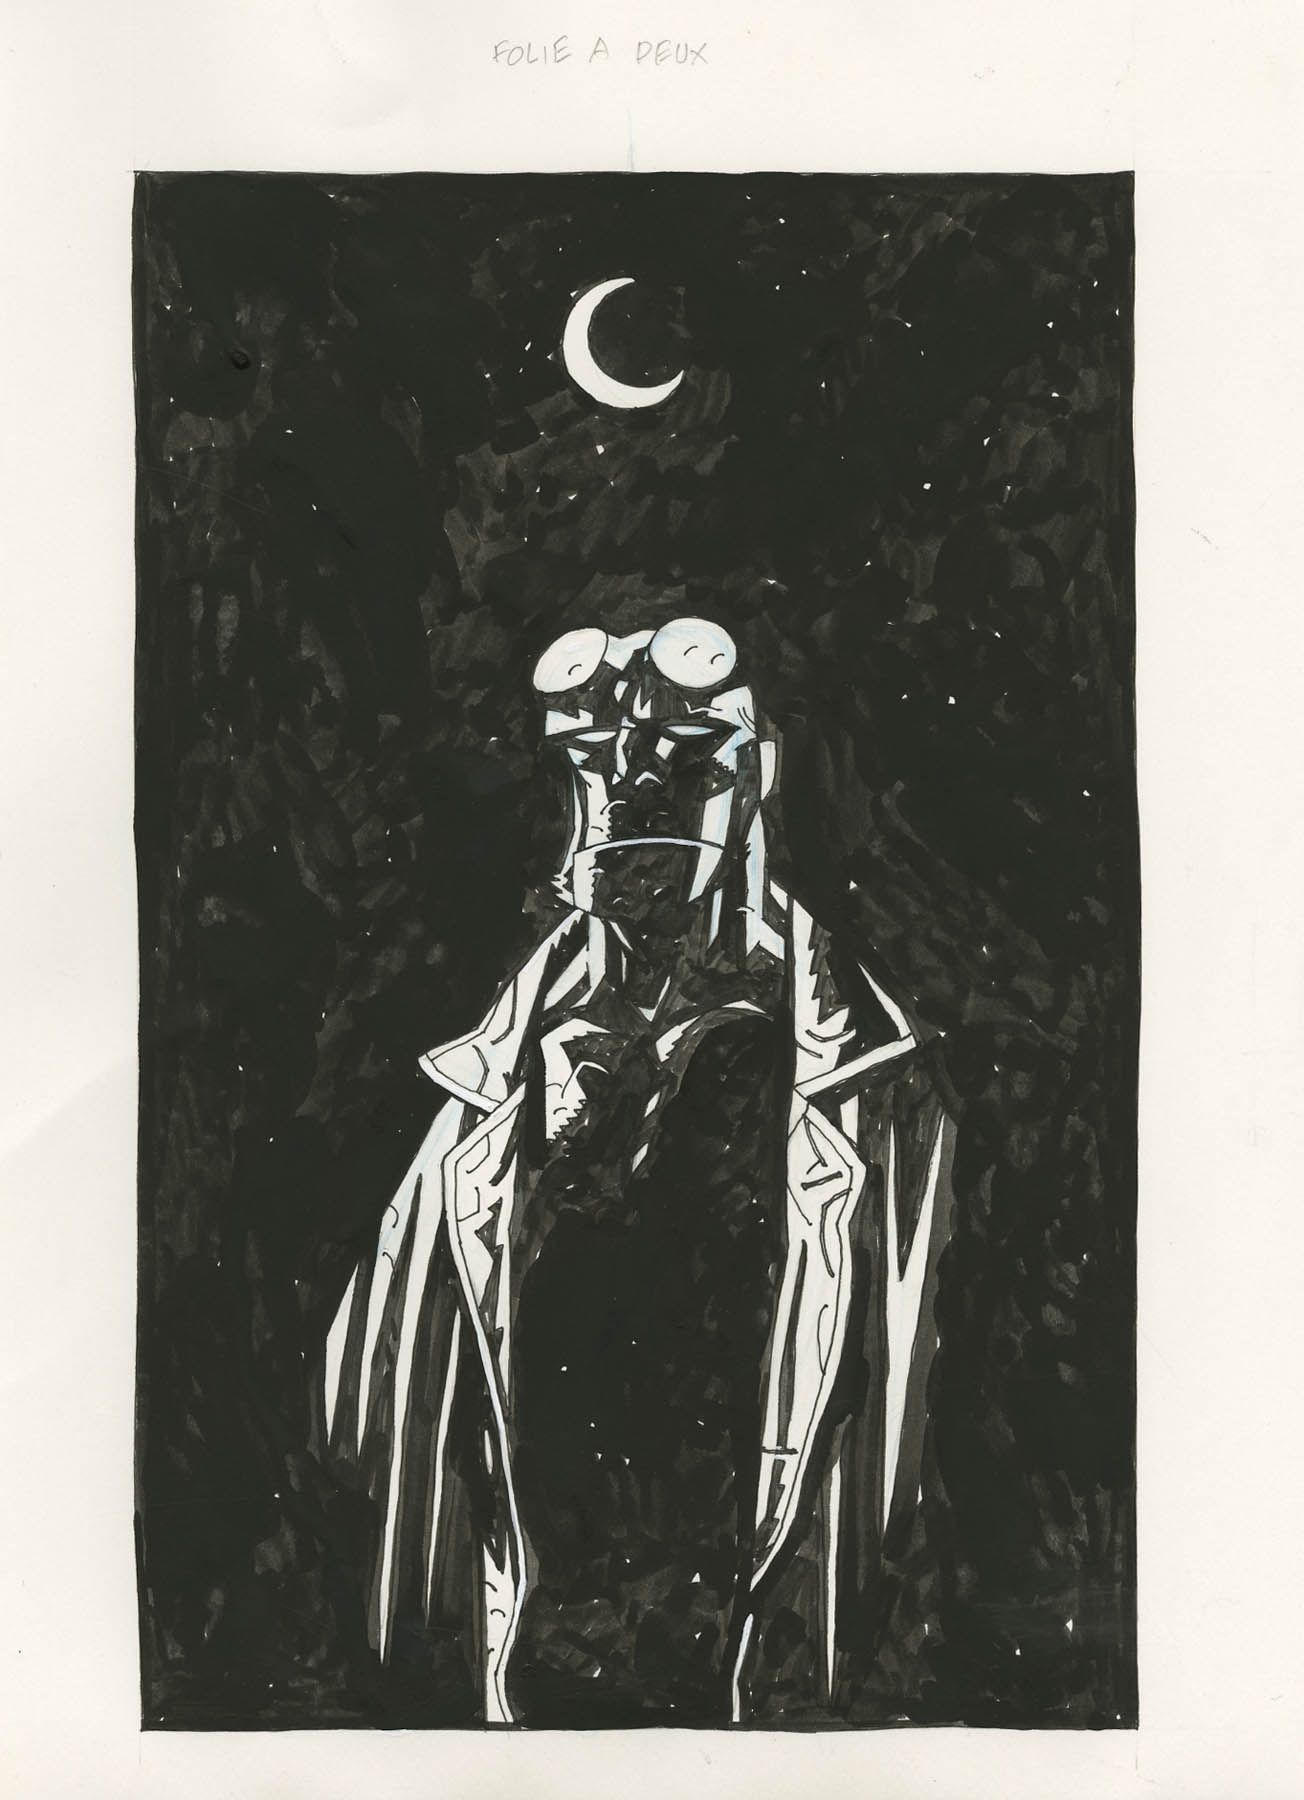 Original art by Mike Mignola from Hellboy Odd Jobs published in 1999